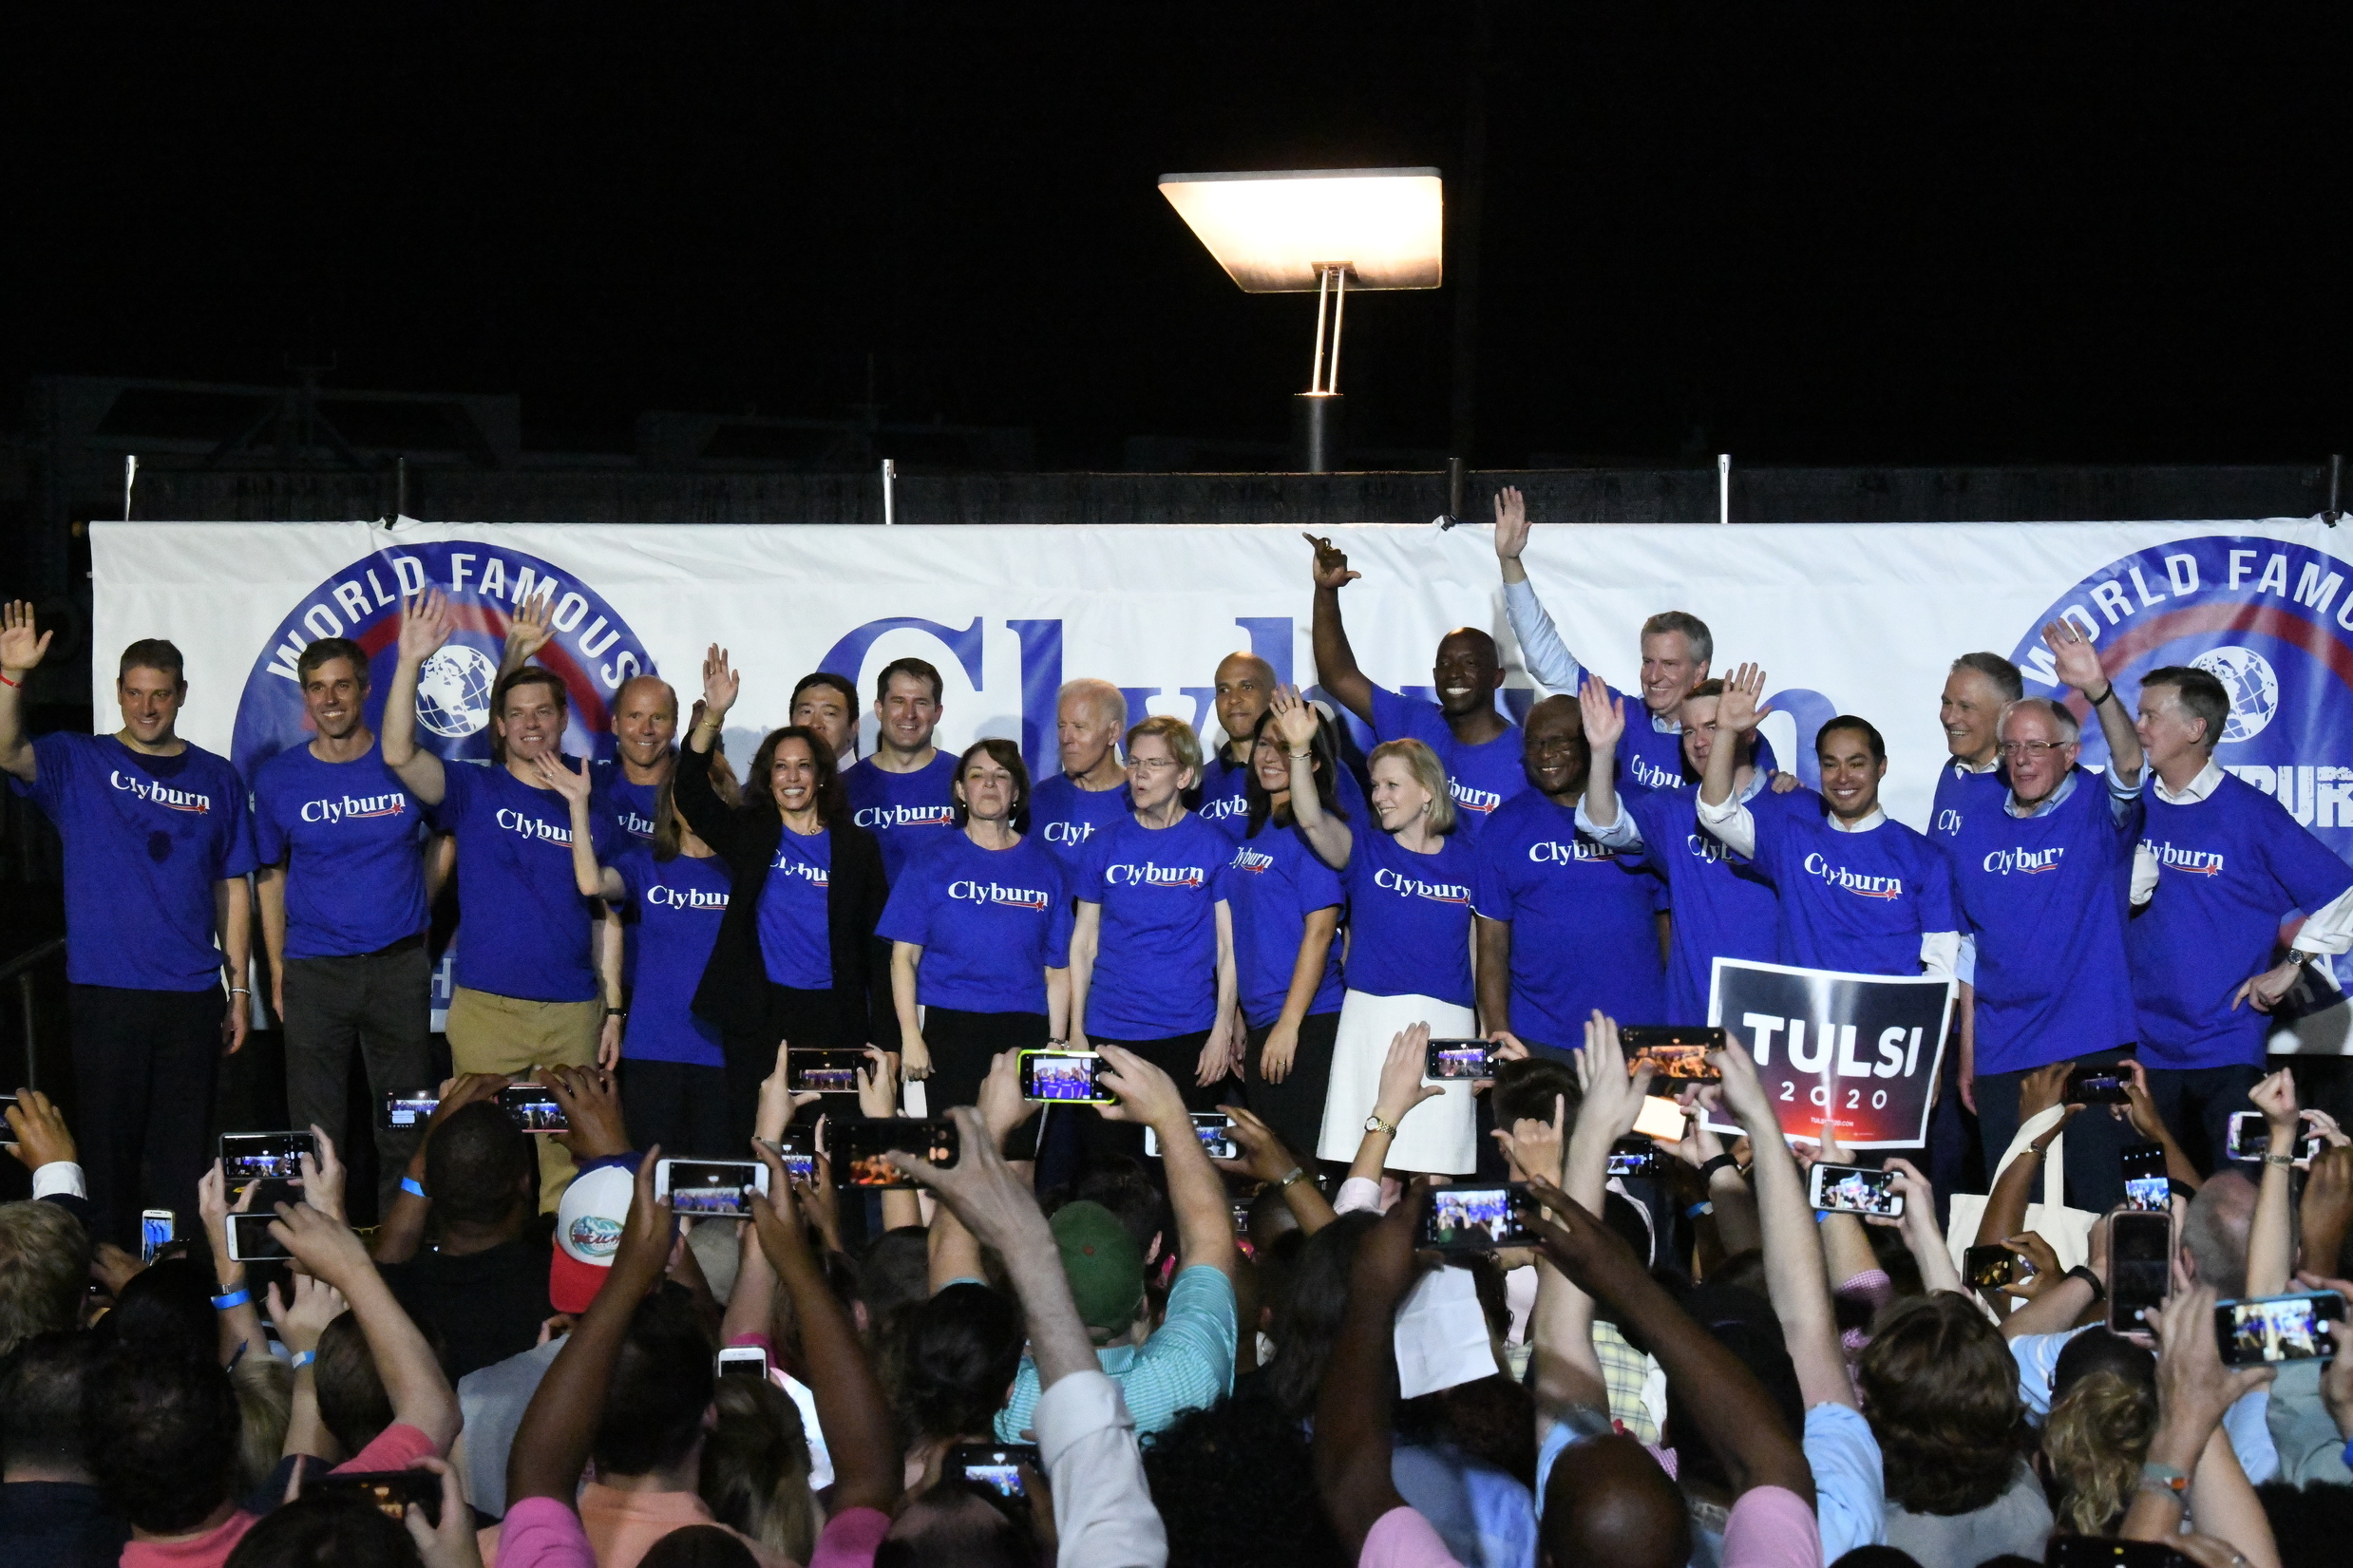 PHOTO: Twenty-one of the Democrats seeking the party's presidential nomination pose together after House Majority Whip Jim Clyburn's "World Famous Fish Fry," Friday, June 21, 2019, in Columbia, S.C.